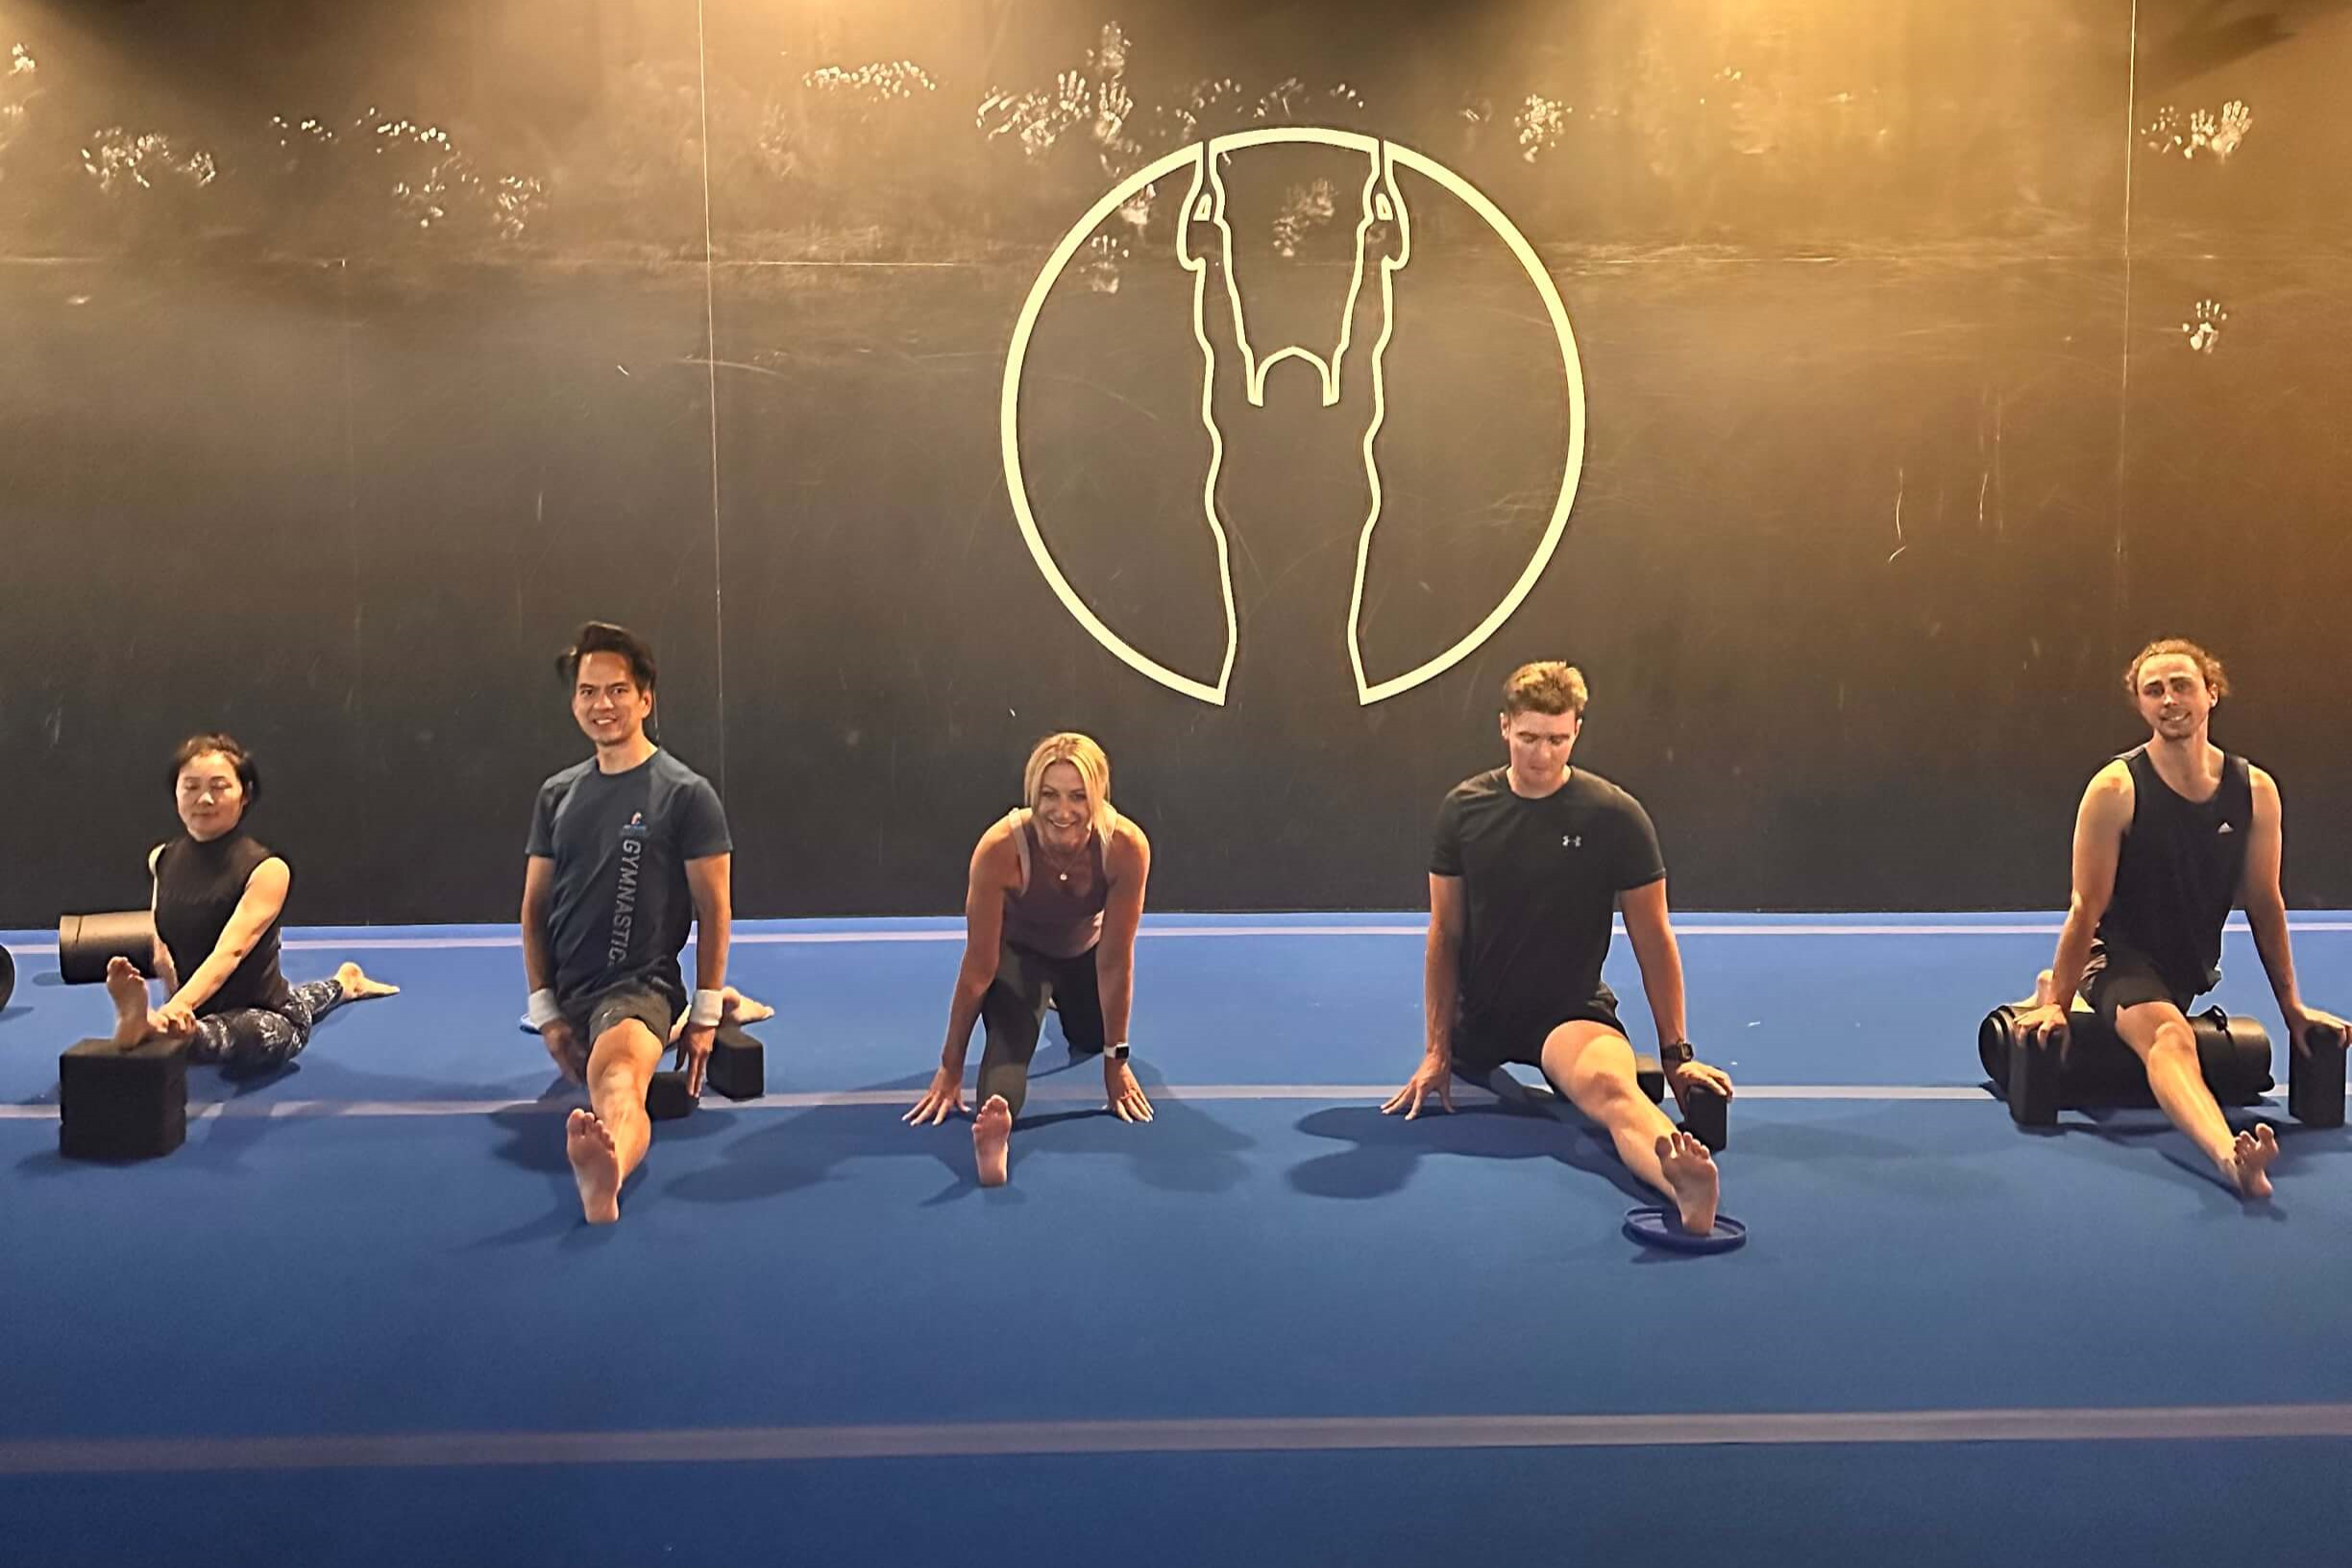 Five people do the middle splits while in a line.